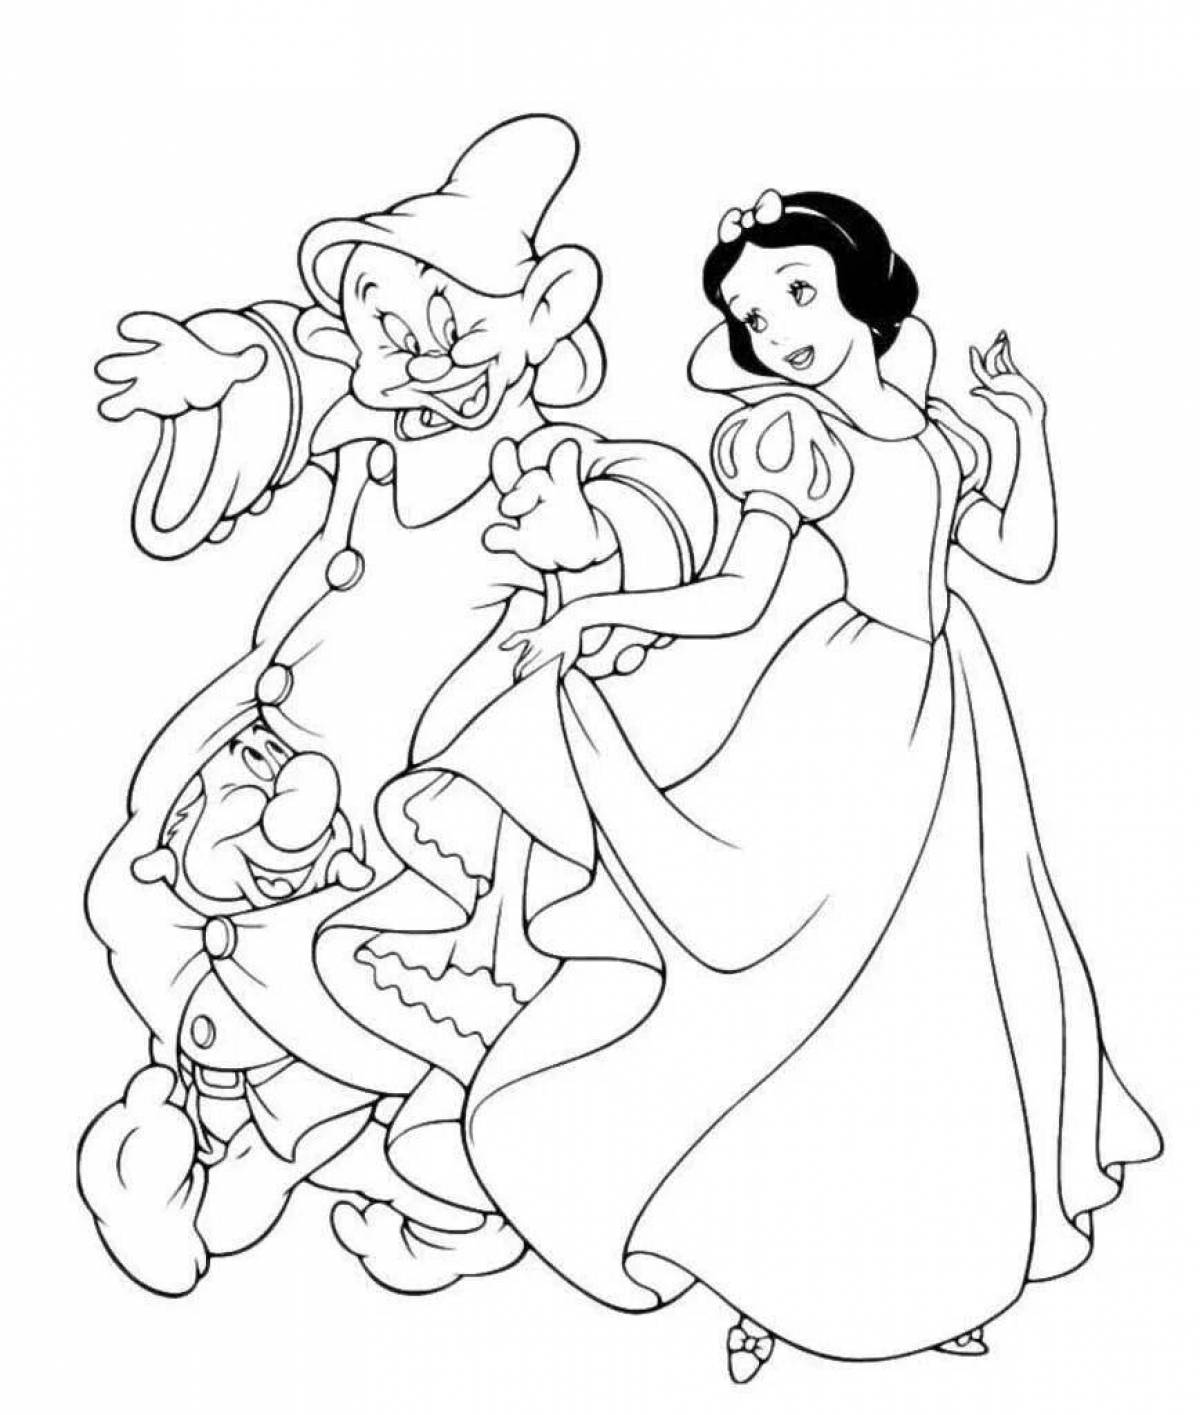 A fun Disney coloring book for 6-7 year olds